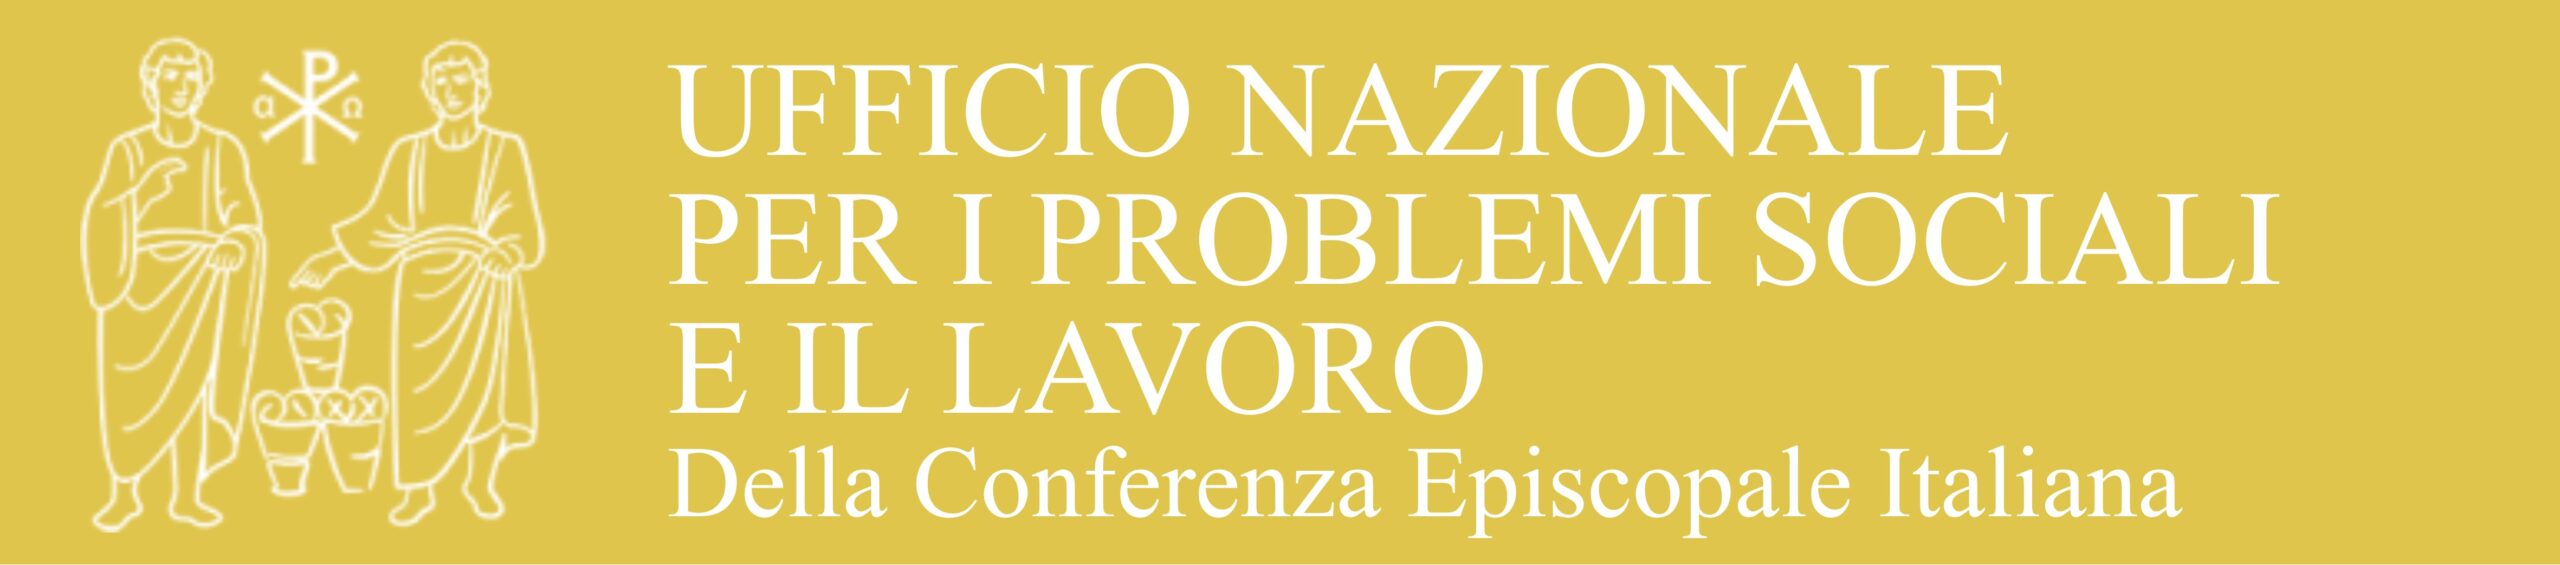 https://lavoro.chiesacattolica.it/